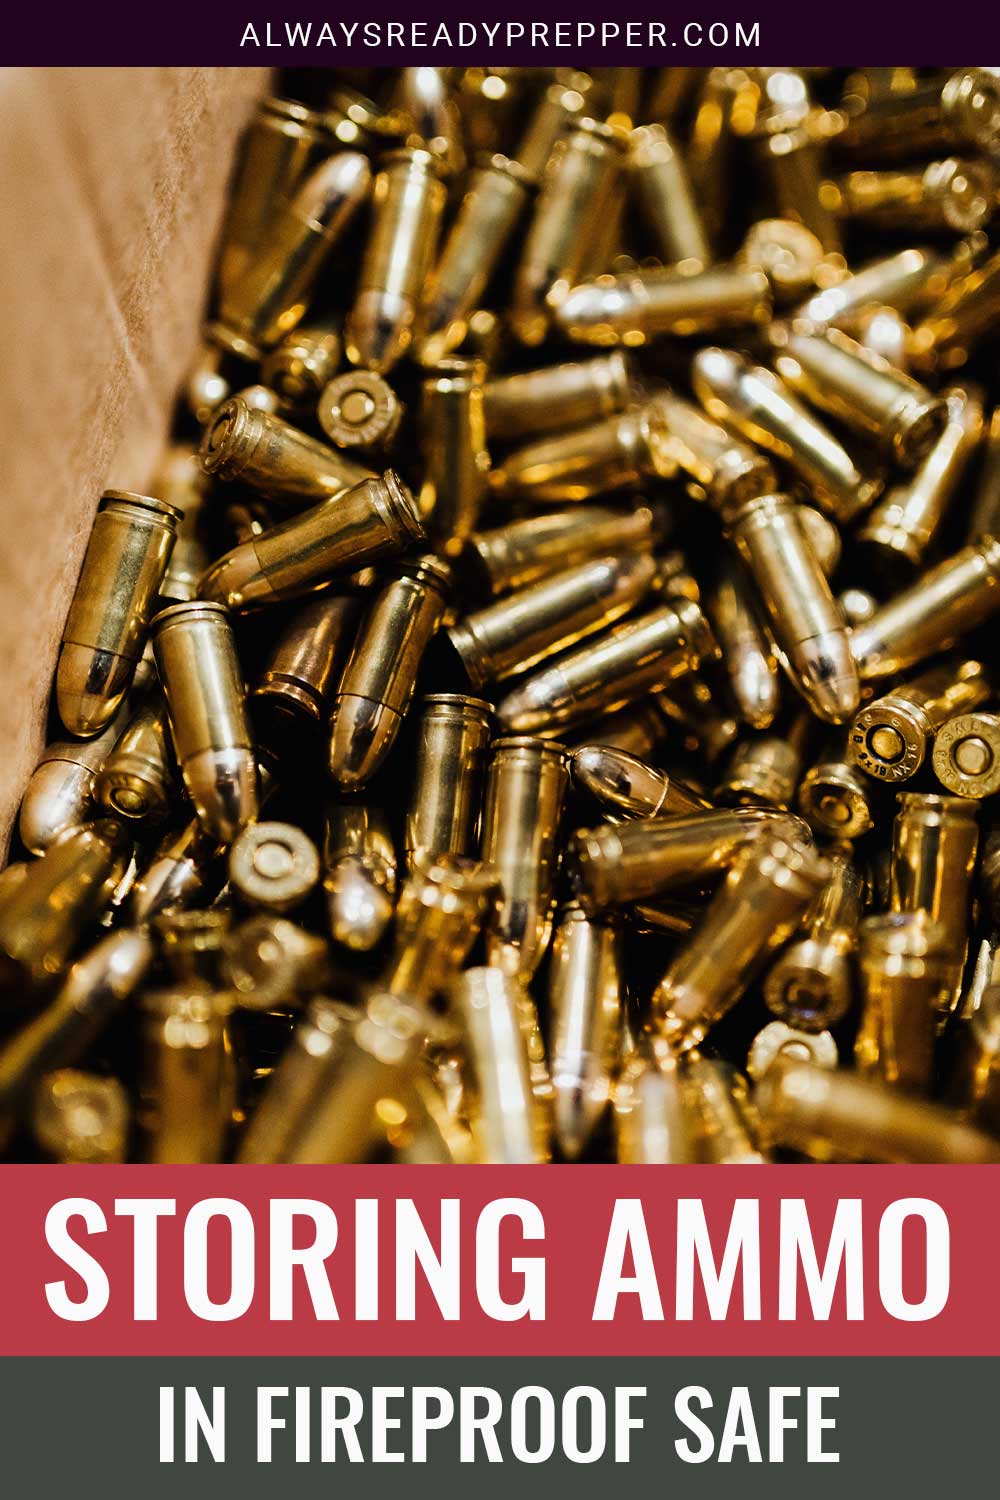 Bullets in a cardboard - Storing Ammo in Fireproof Safe